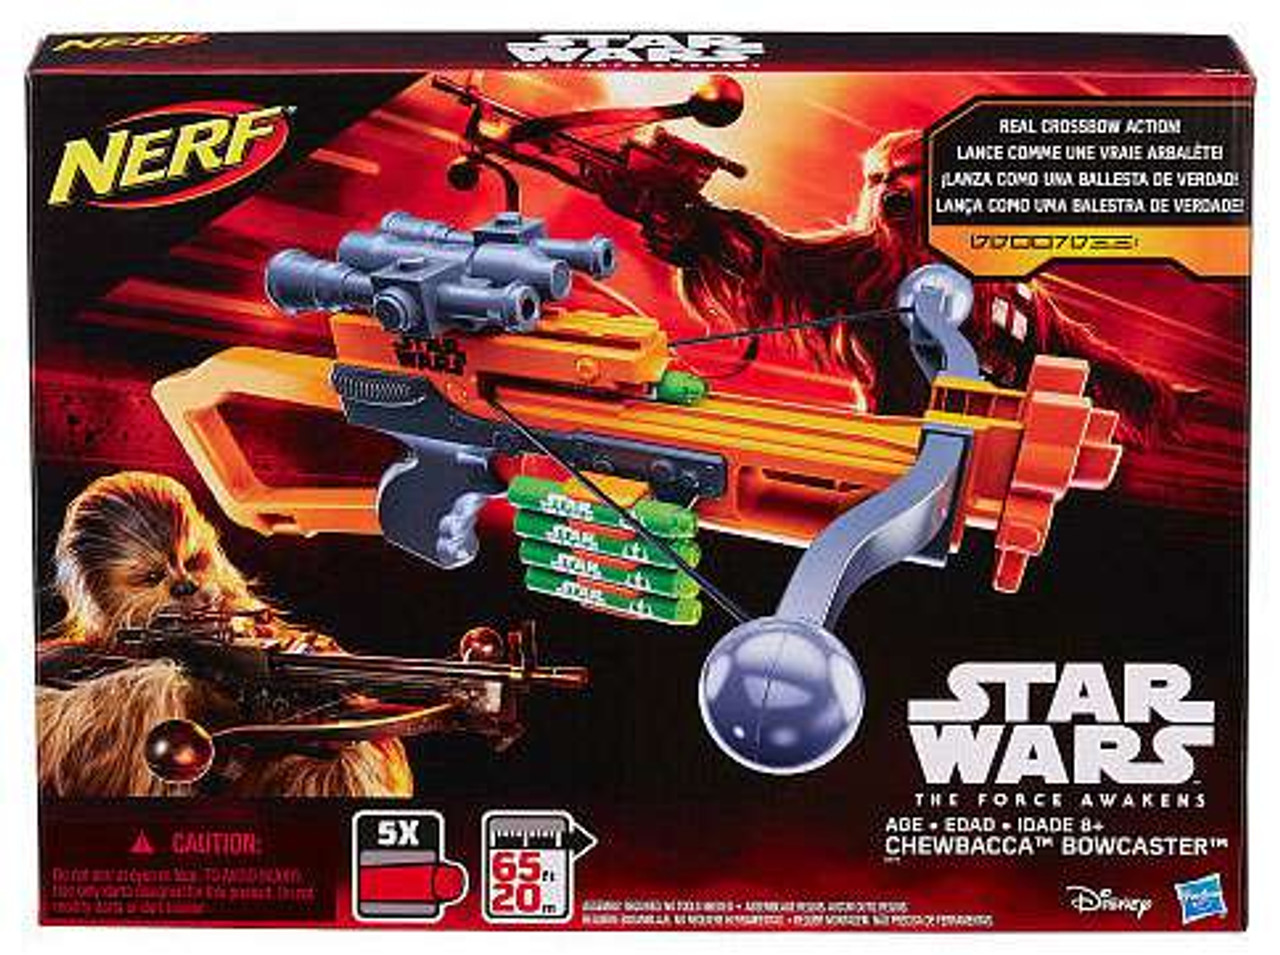 Star Wars The Force Awakens Nerf Chewbaccas Bowcaster Roleplay Toy Hasbro Toys Toywiz - roblox killing people with nerf guns nerf wars roblox roblox adventures